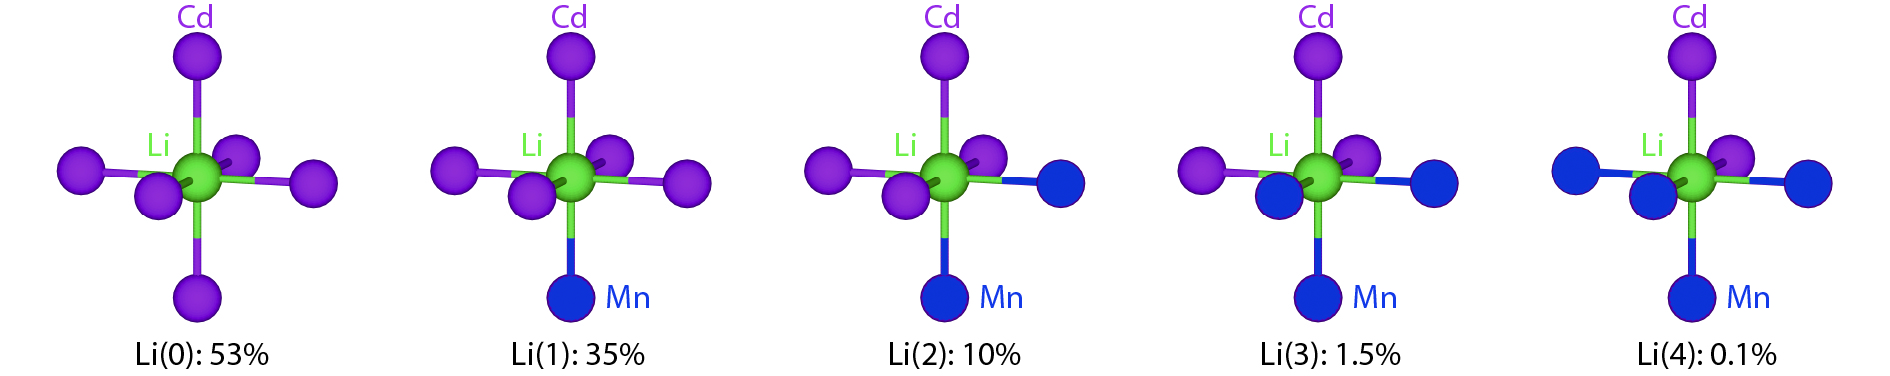 (Color online) The probability to find Li(0), Li(1), Li(2), Li(3), Li(4) for 10% Mn doped into Cd sites in LiCdP. The number in bracket means the number of Mn atoms at N.N. Cd sites.